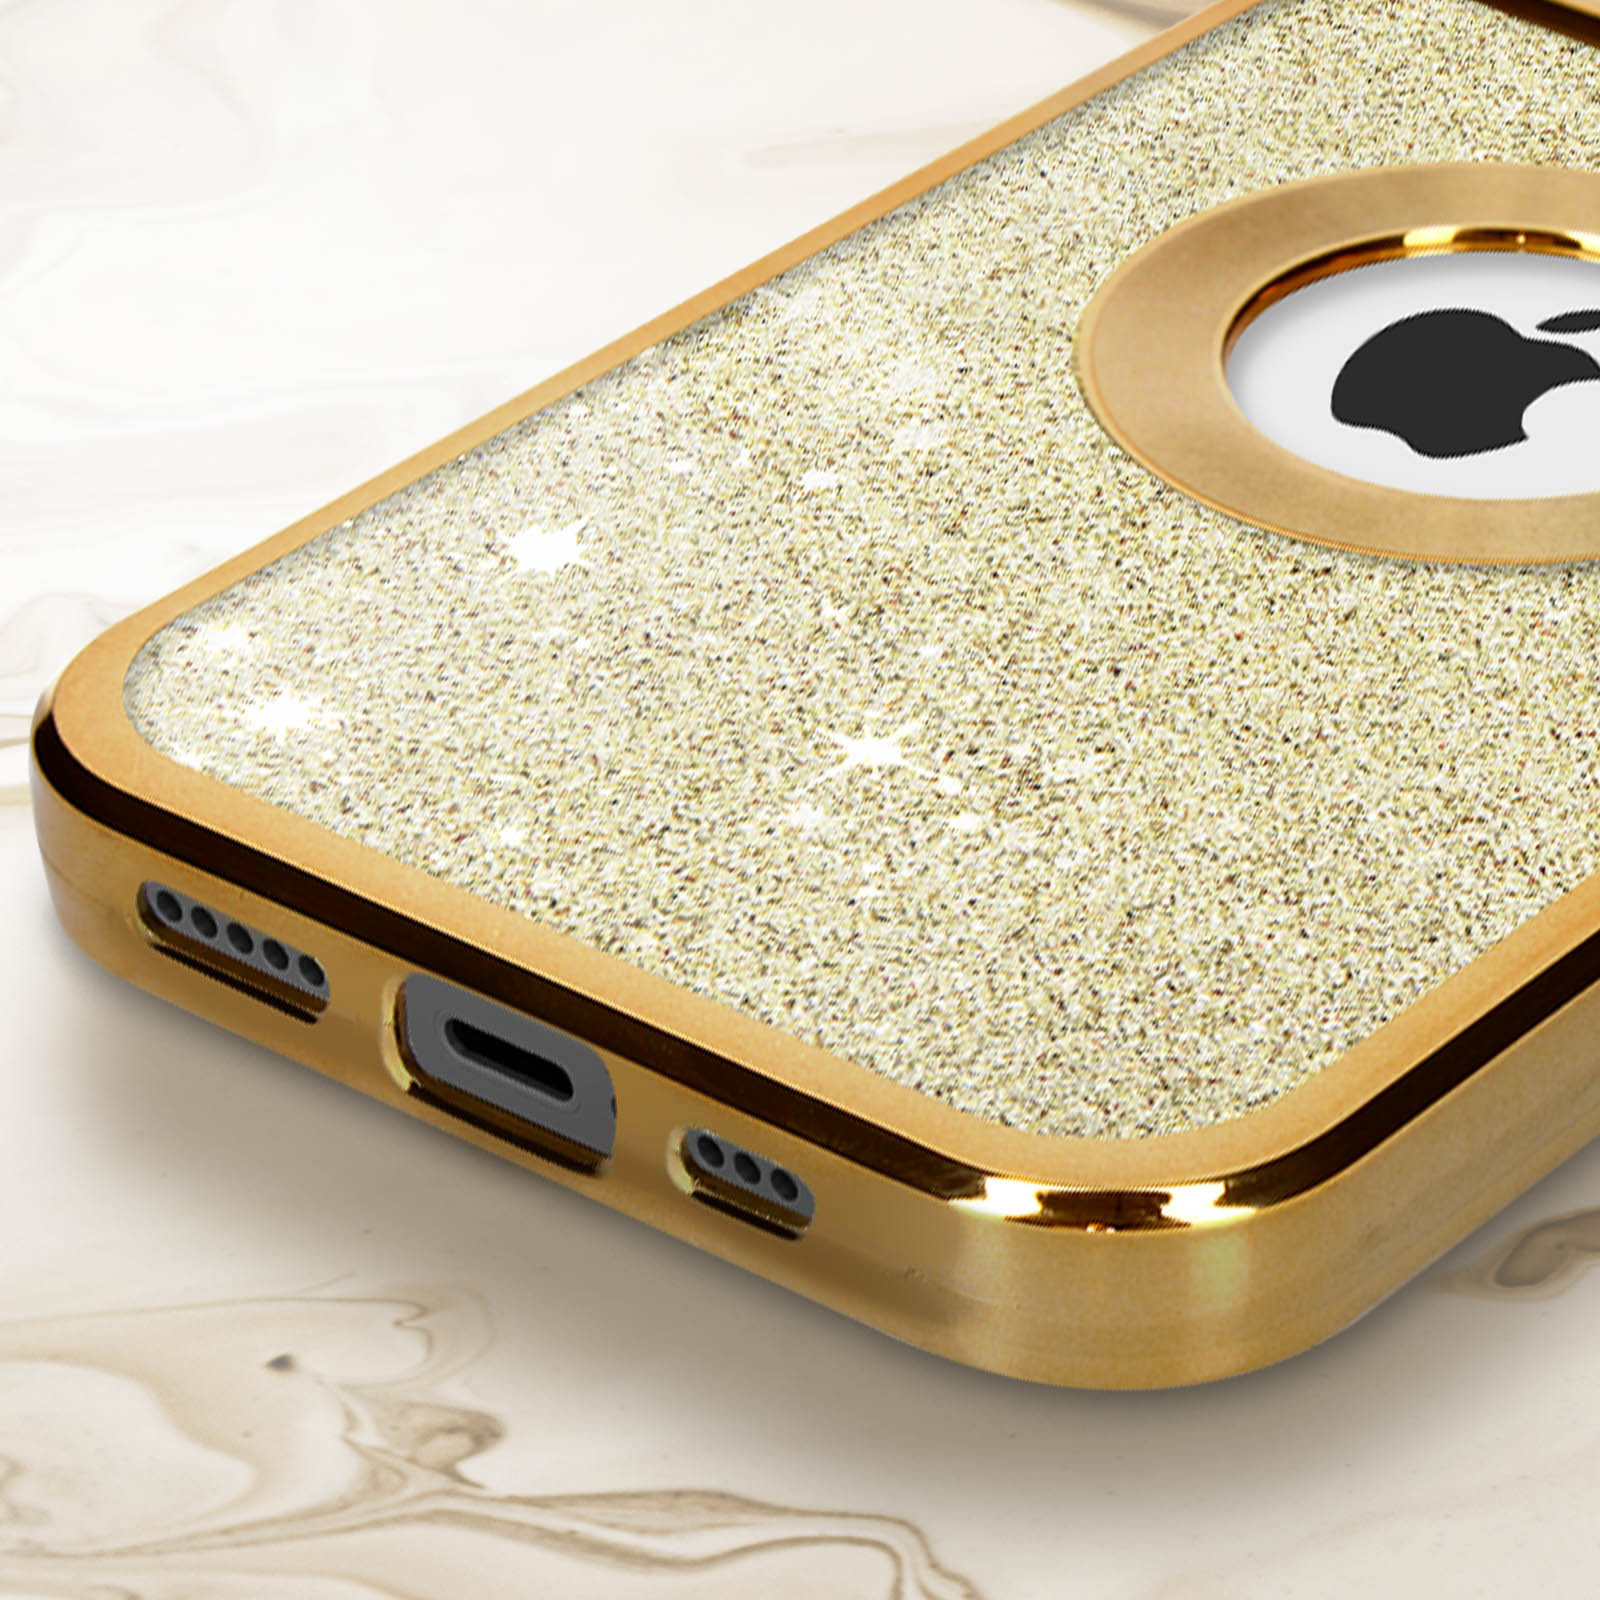 AVIZAR Protecam Spark Series, Backcover, iPhone Apple, Pro, 12 Gold